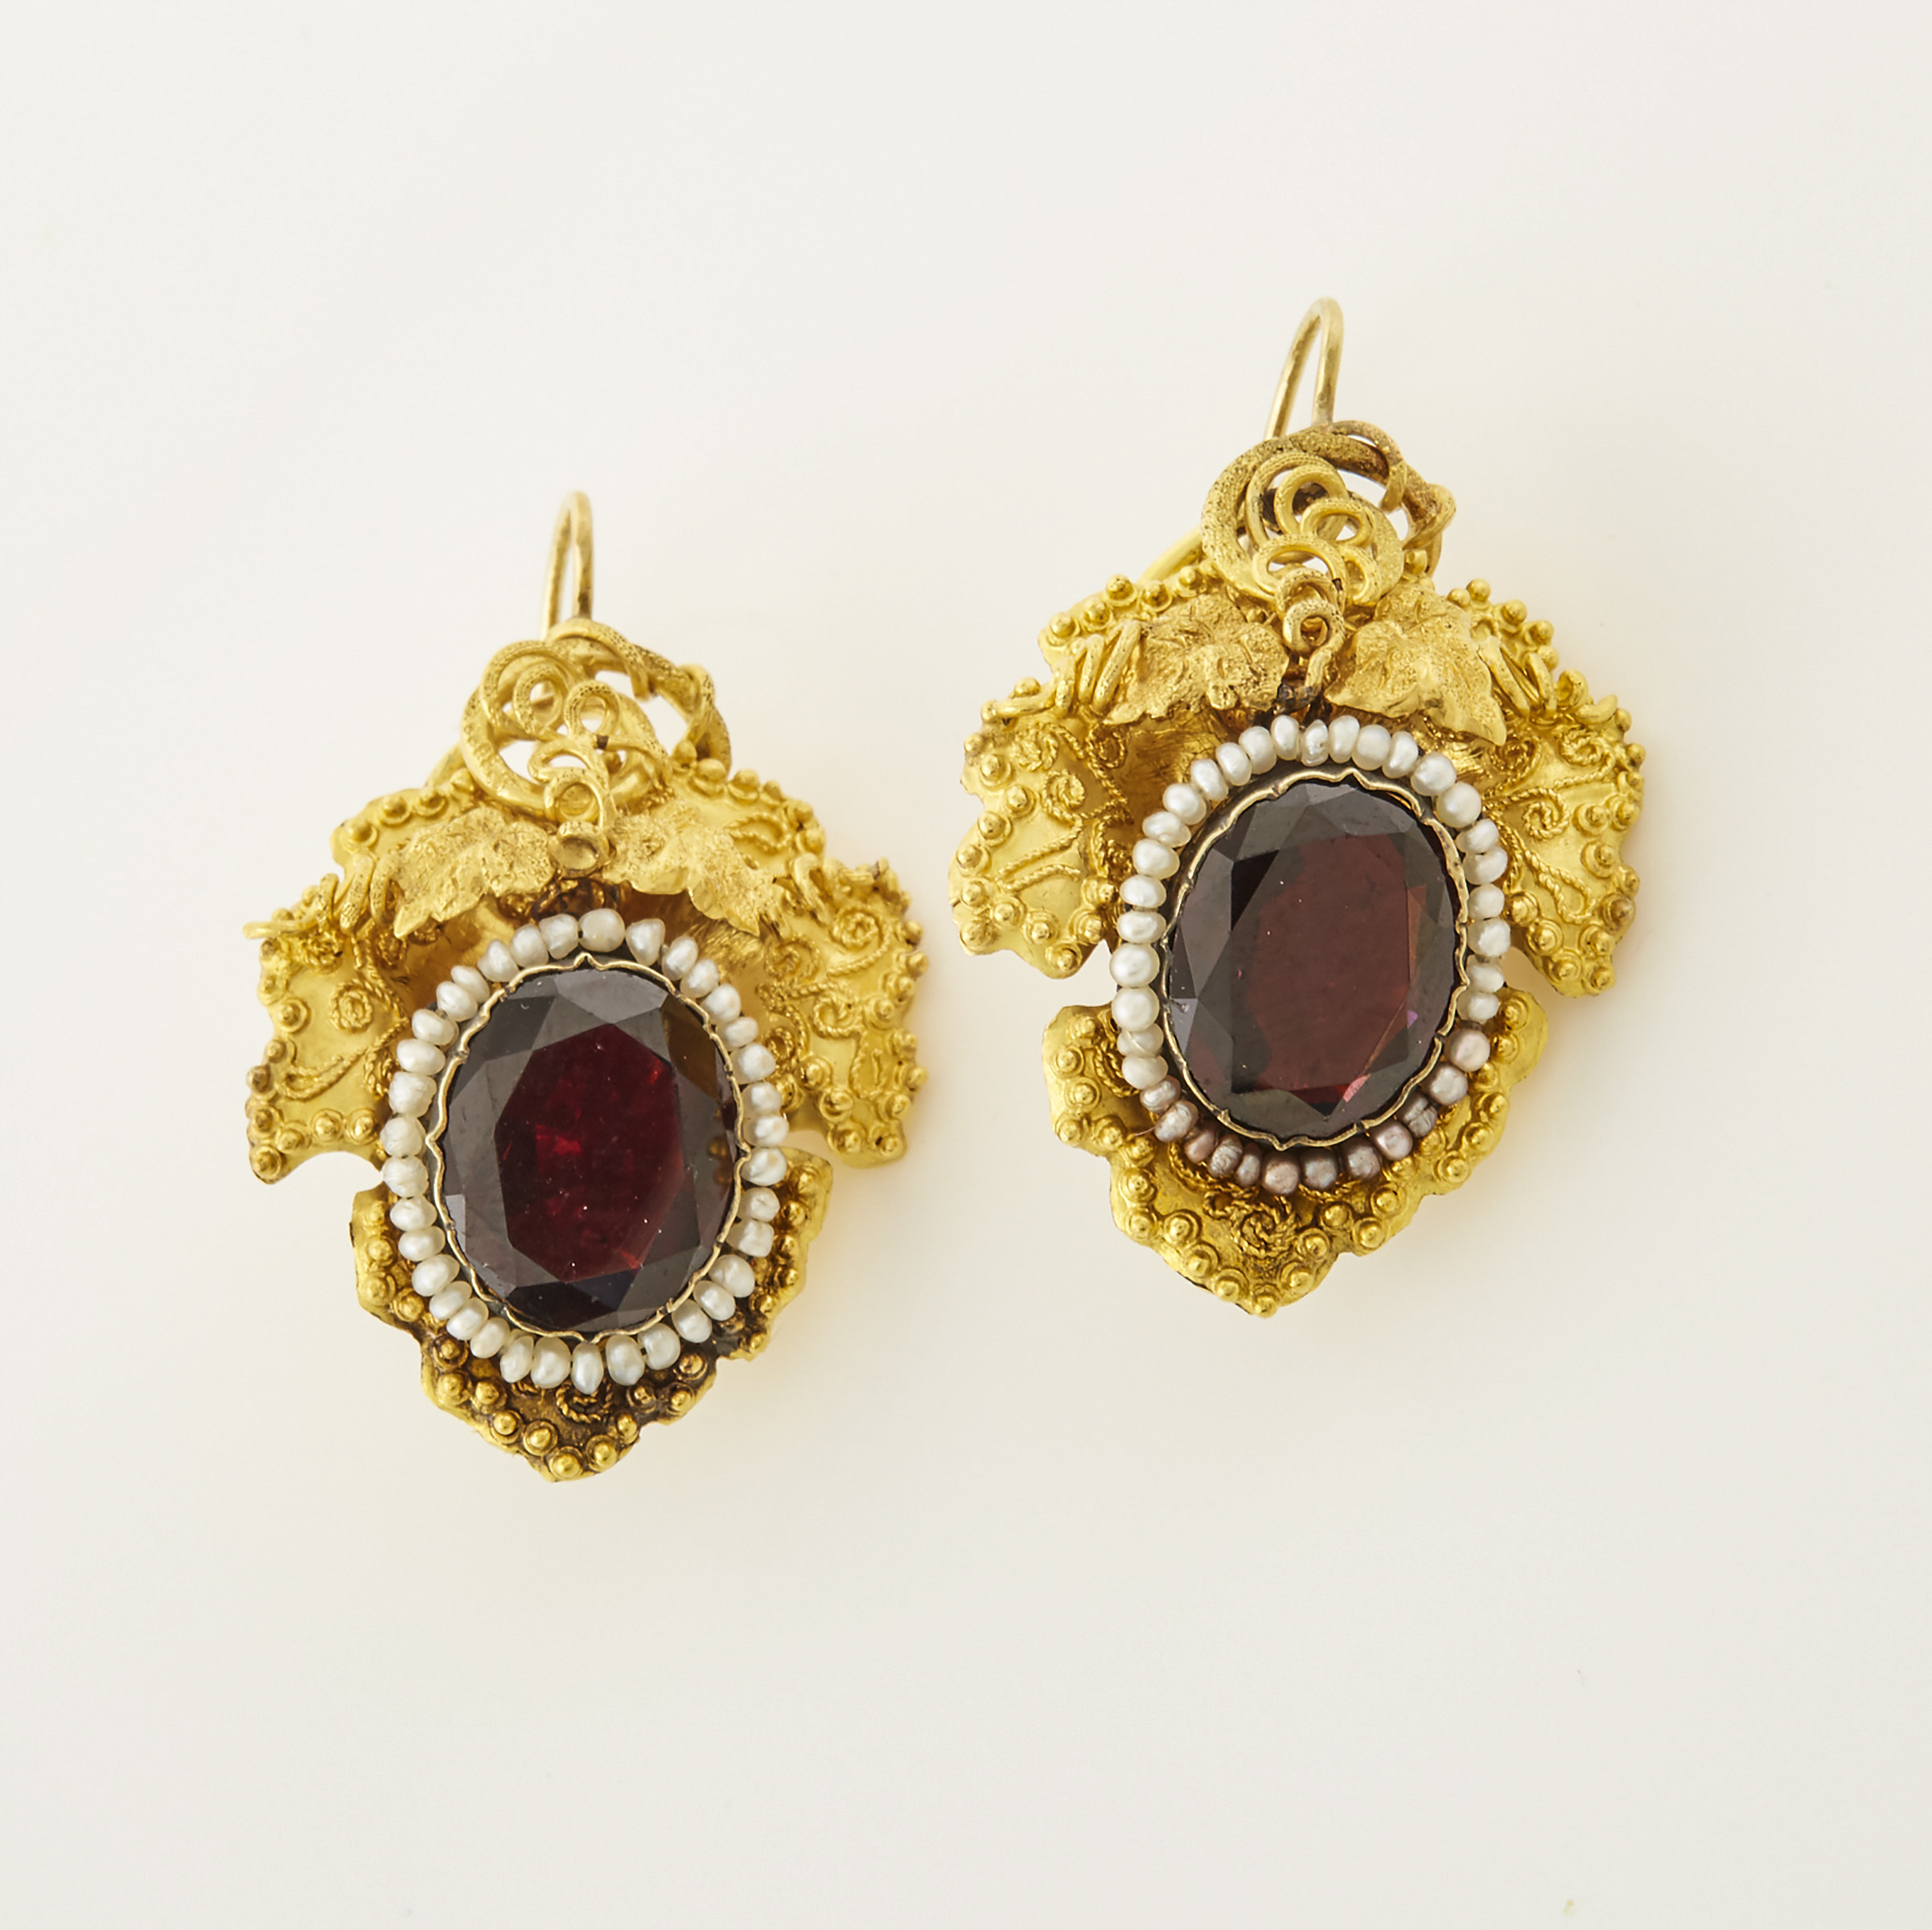 Pair of 19th Century 14k Yellow Gold Earrings